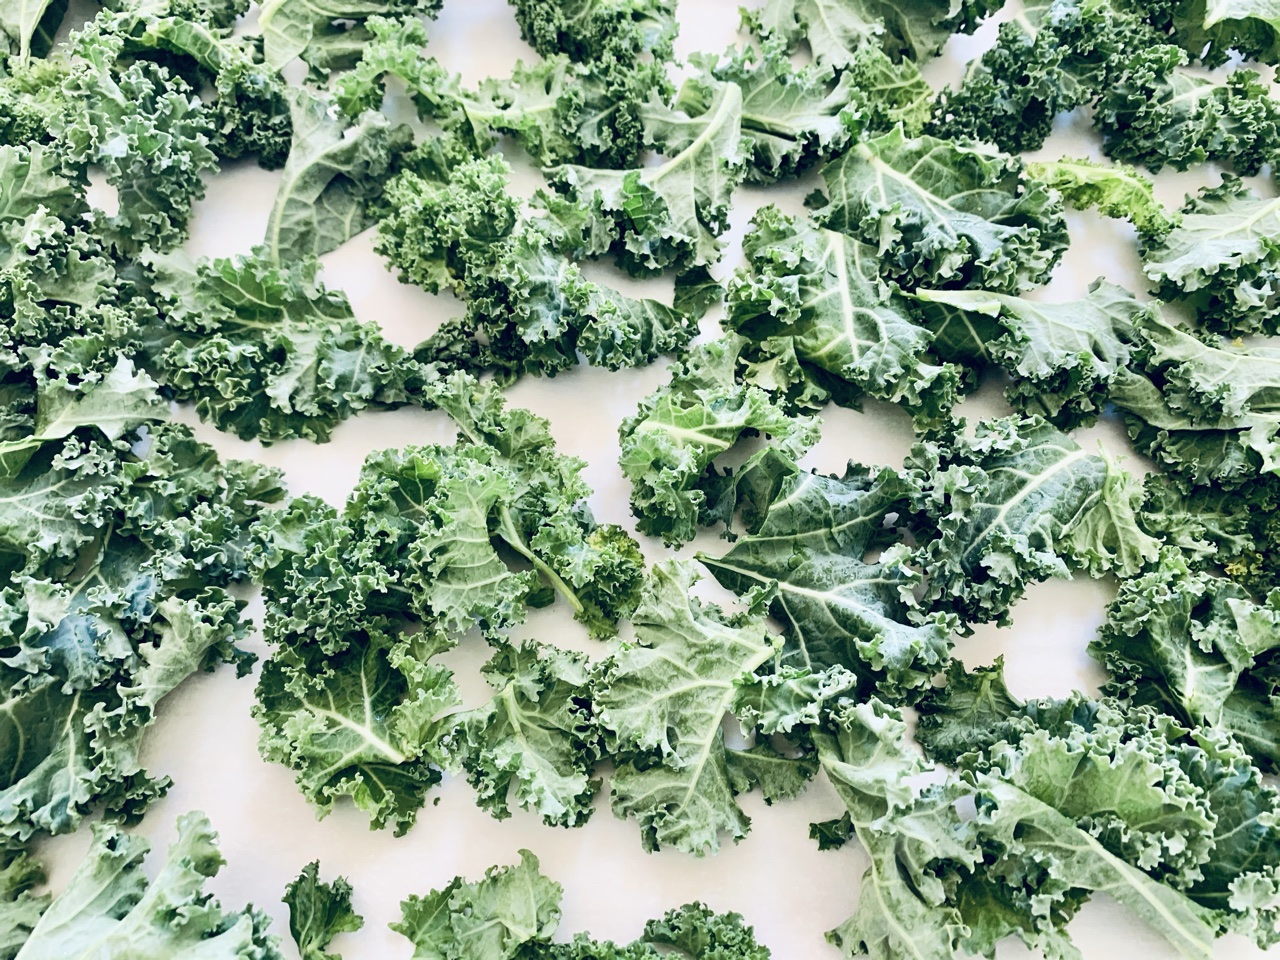 How to Make Quick & Easy Kale Chips (20 Minutes)